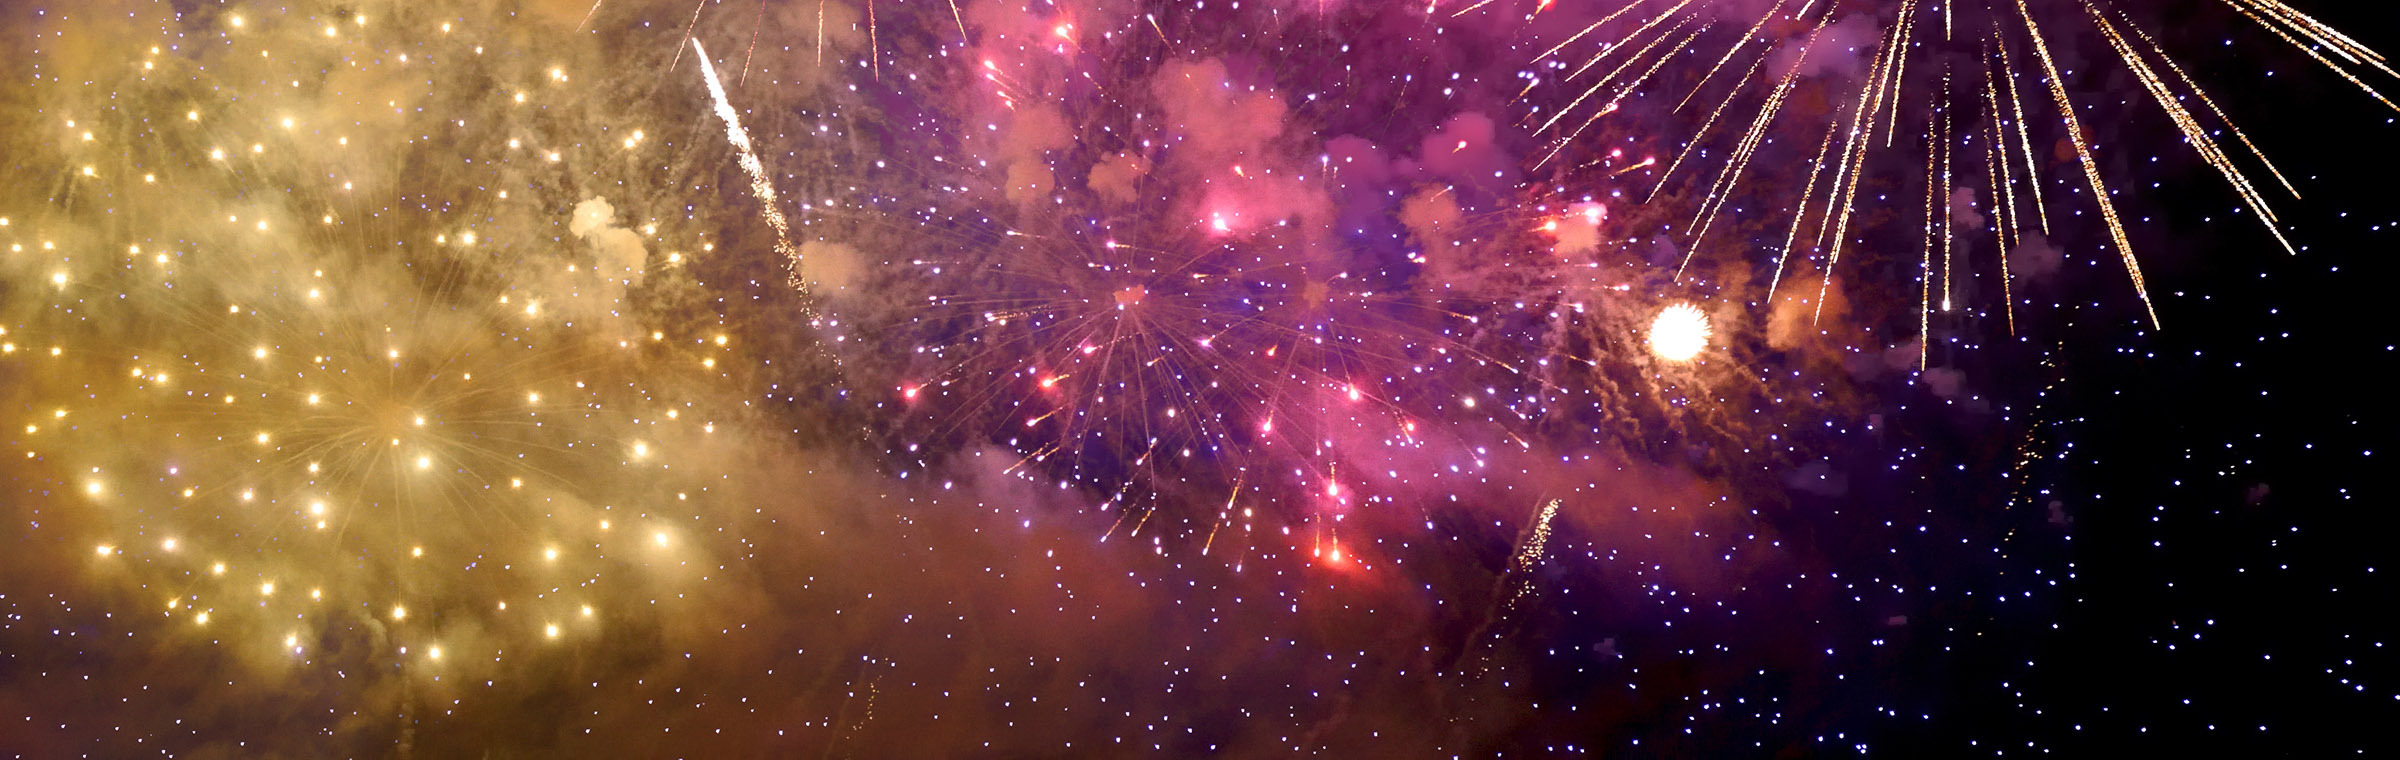 purple and gold fireworks against a starry sky